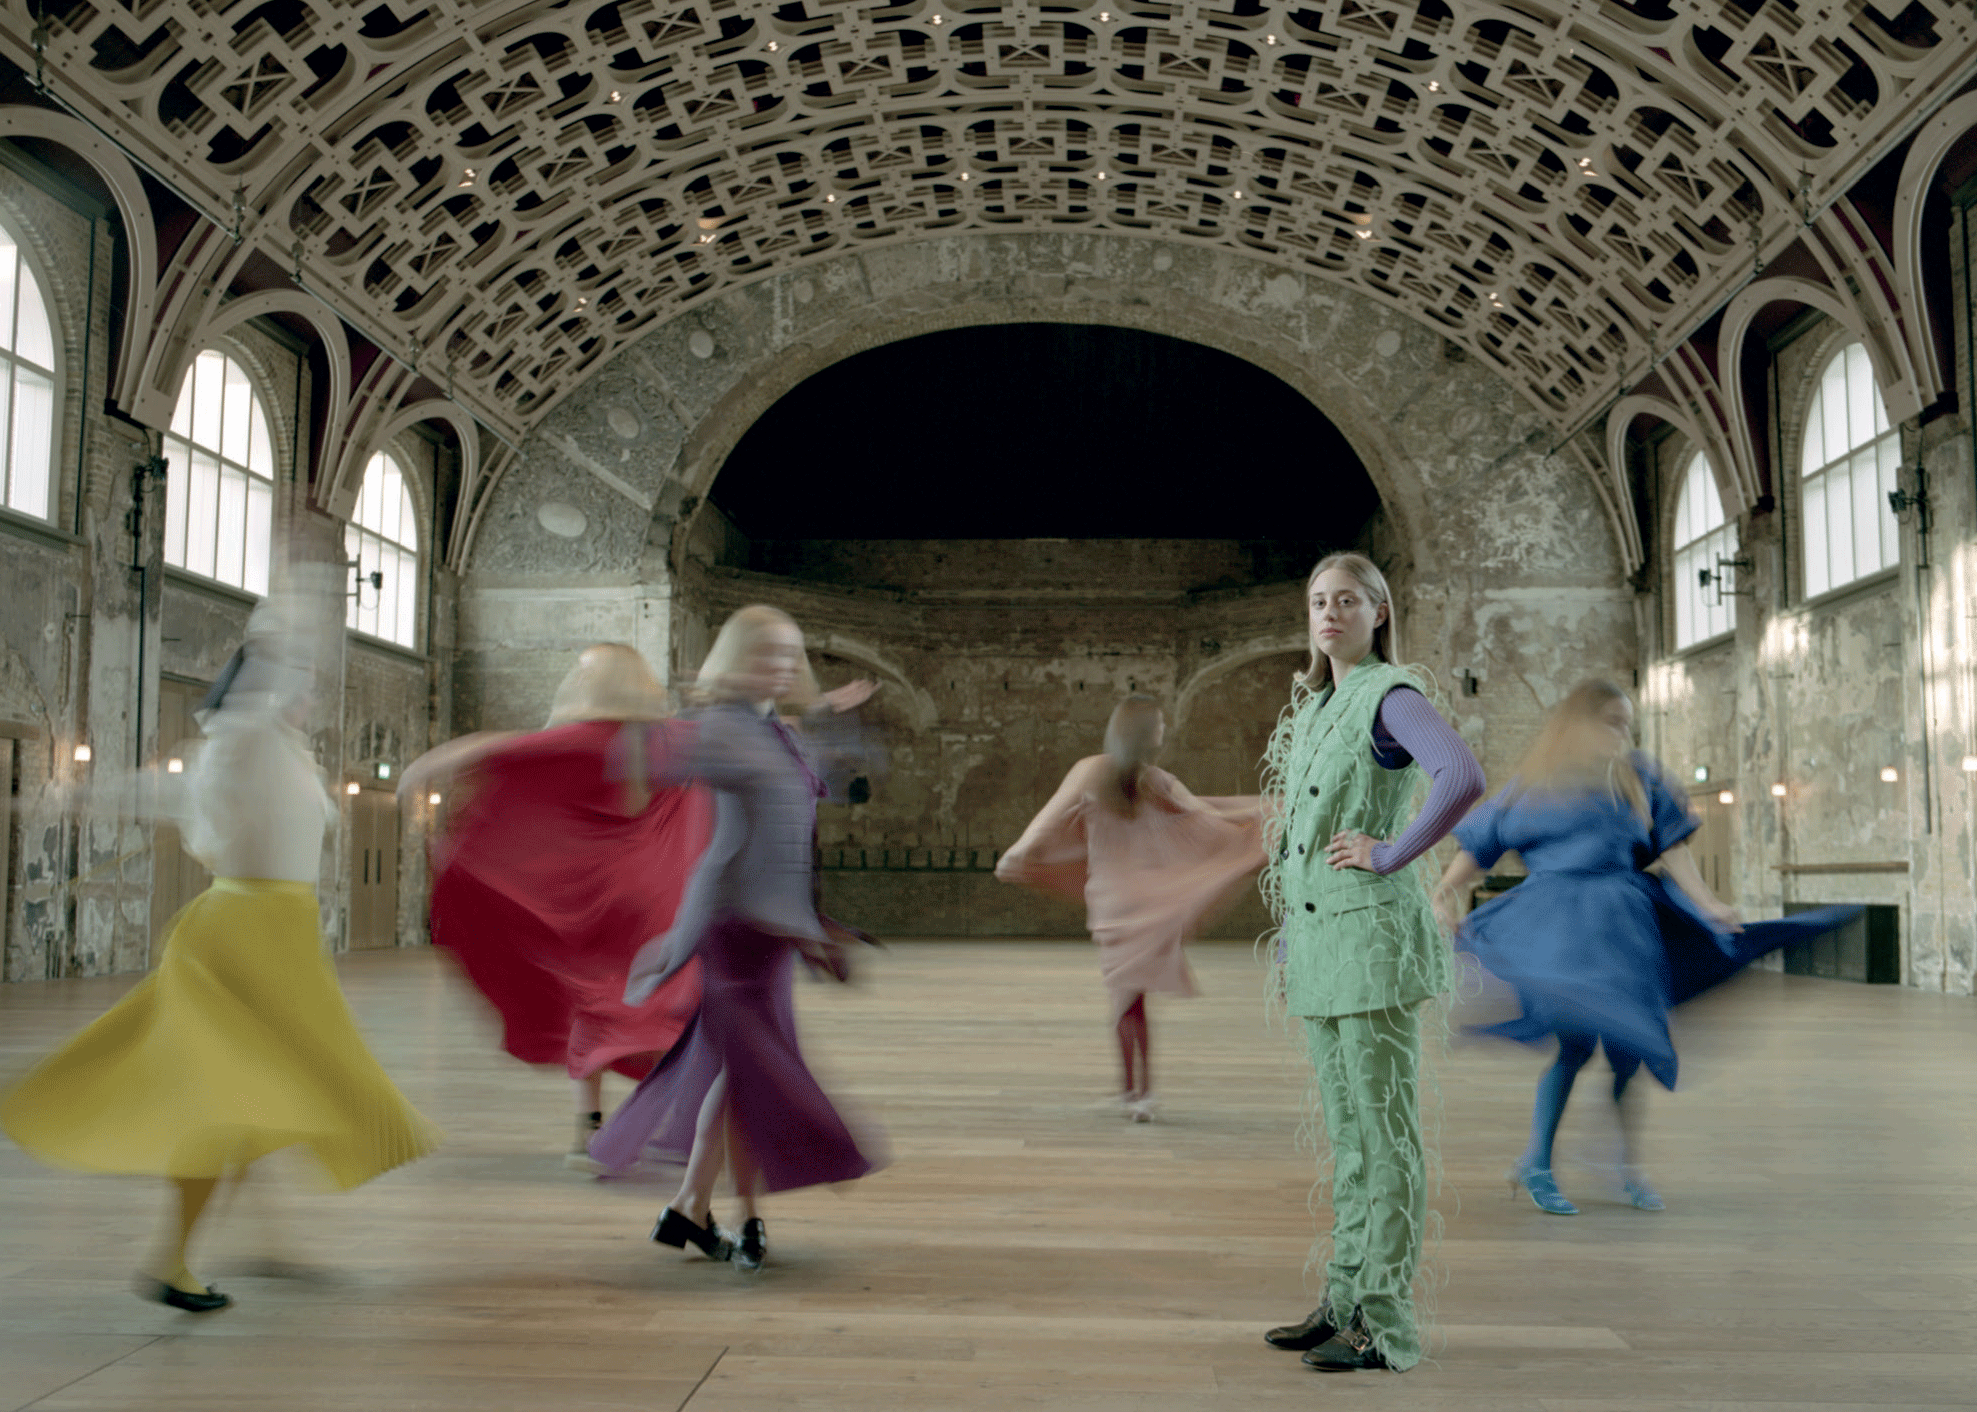 One unmoving woman, dressed in green, surrounded by the blurred images of dancers